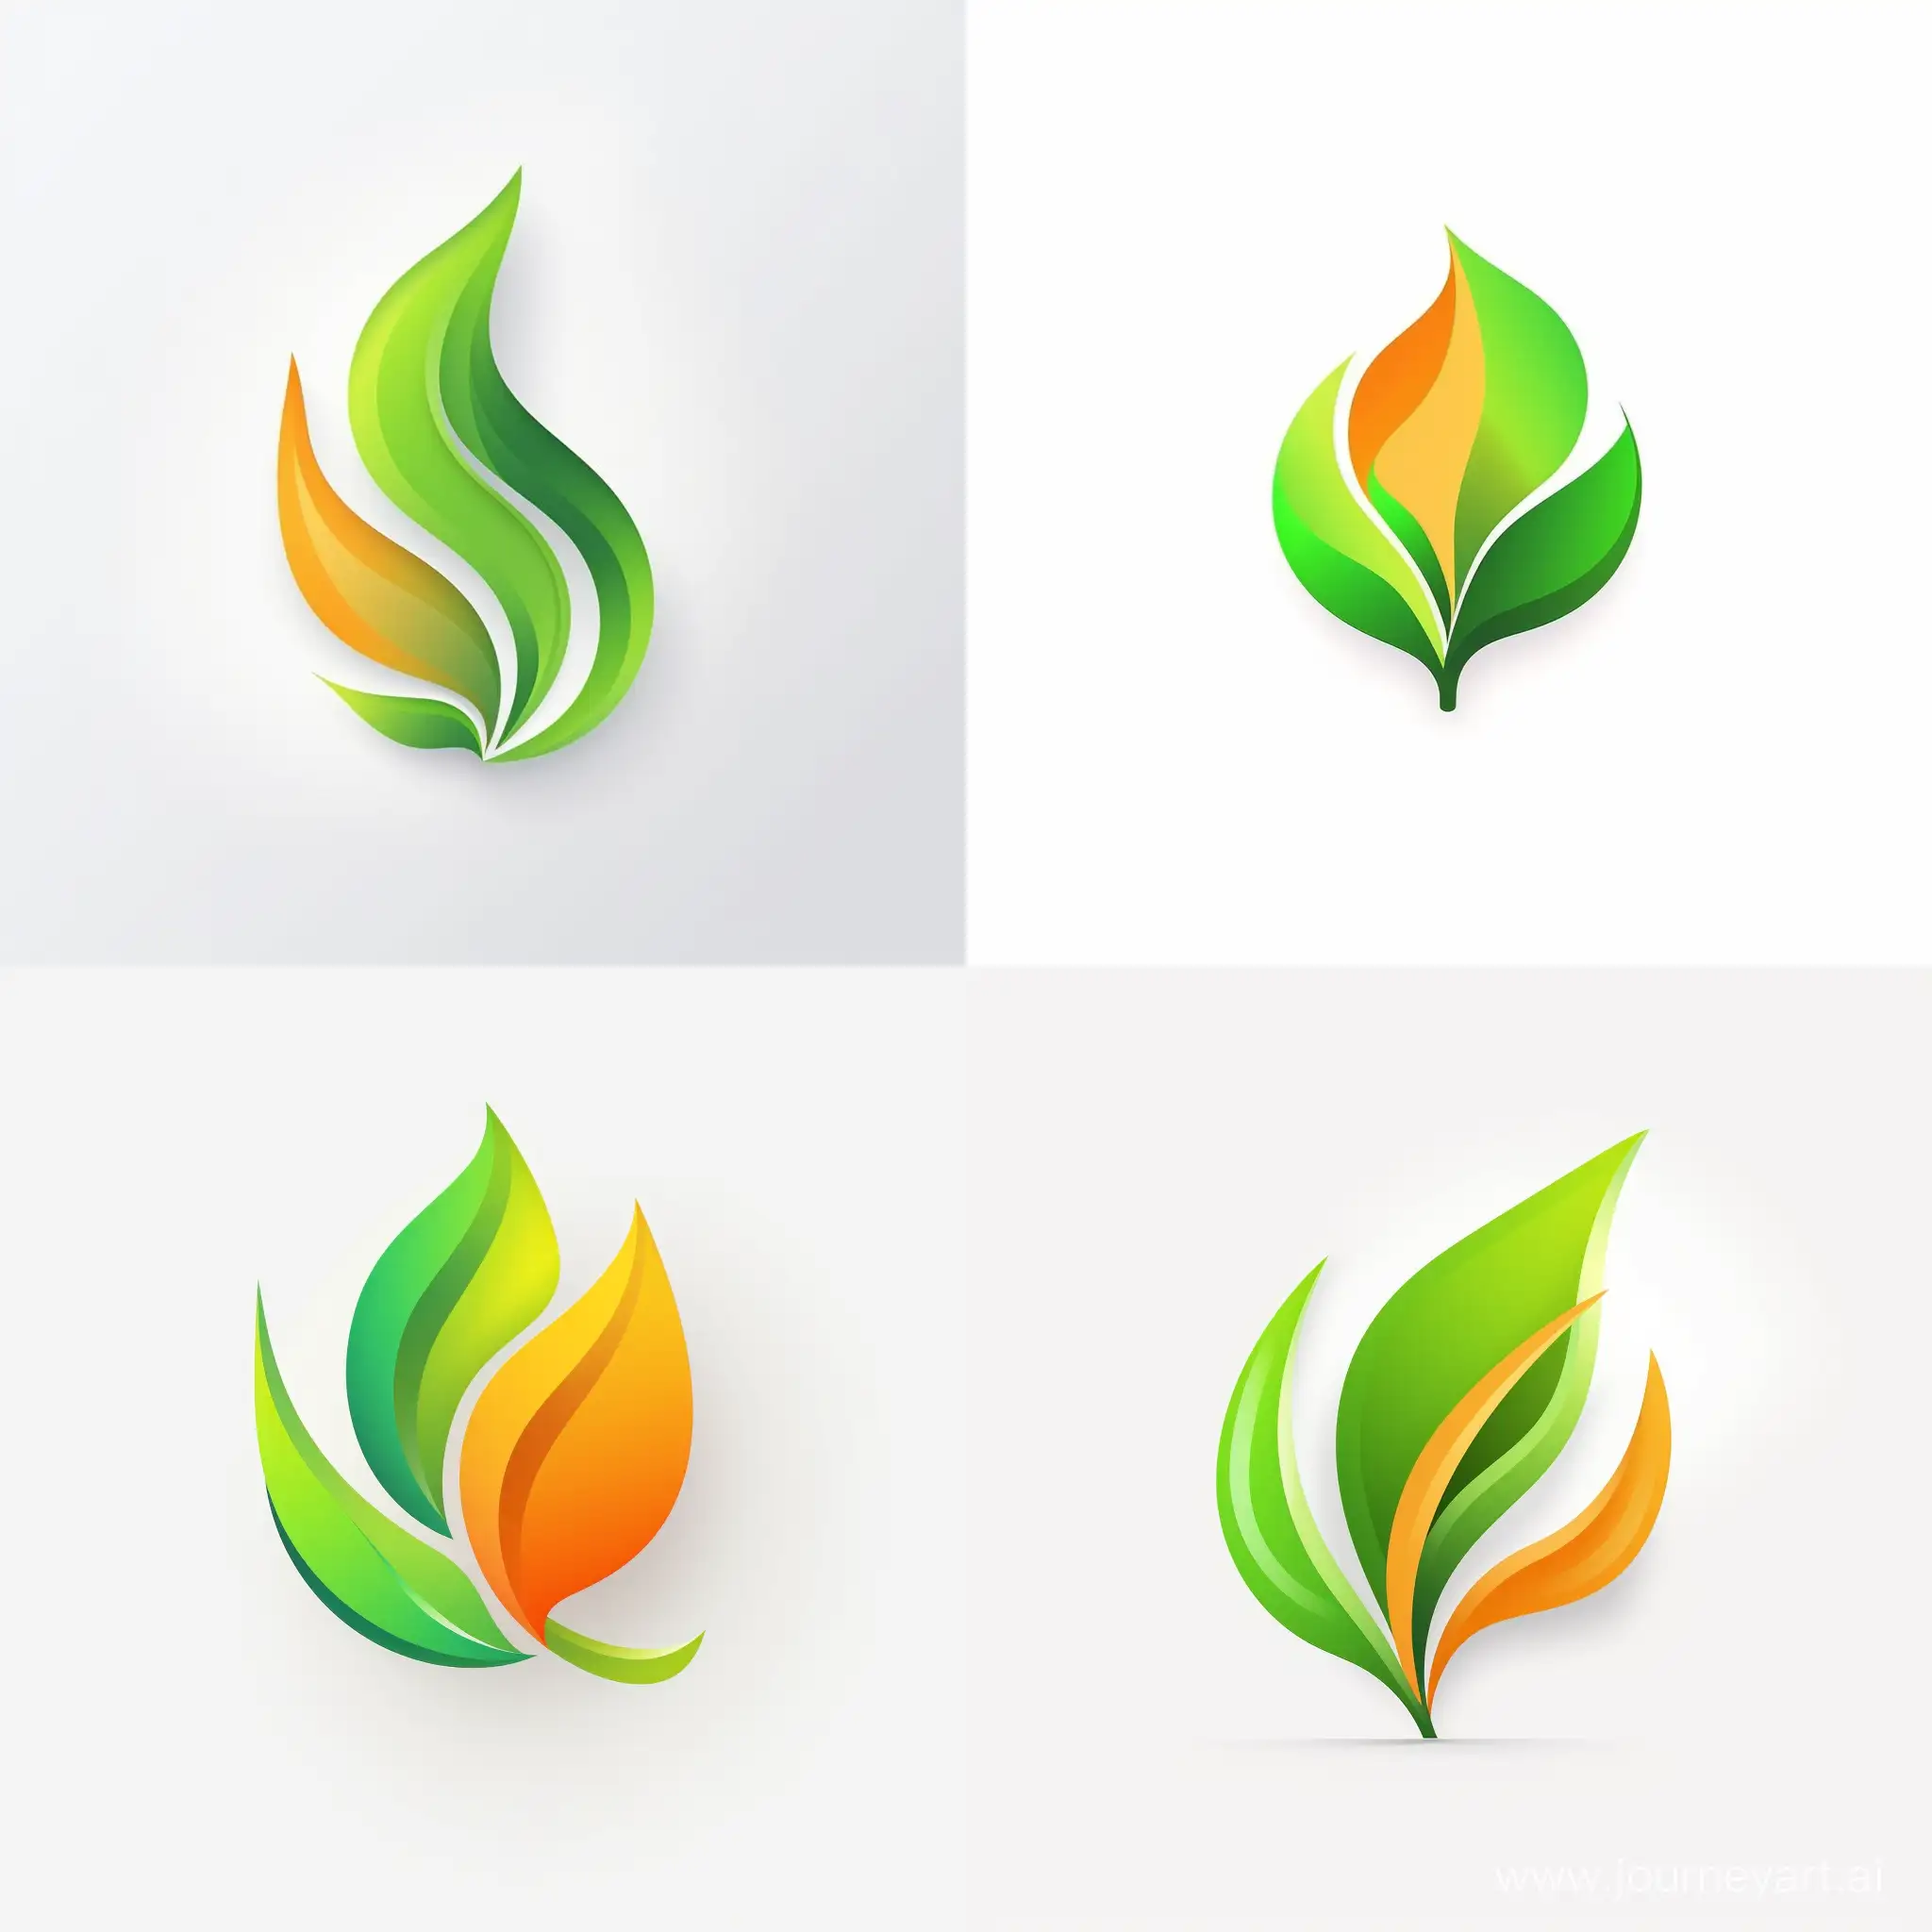 Enersave-EcoFriendly-Battery-Saver-Logo-with-Leaf-and-Arrow